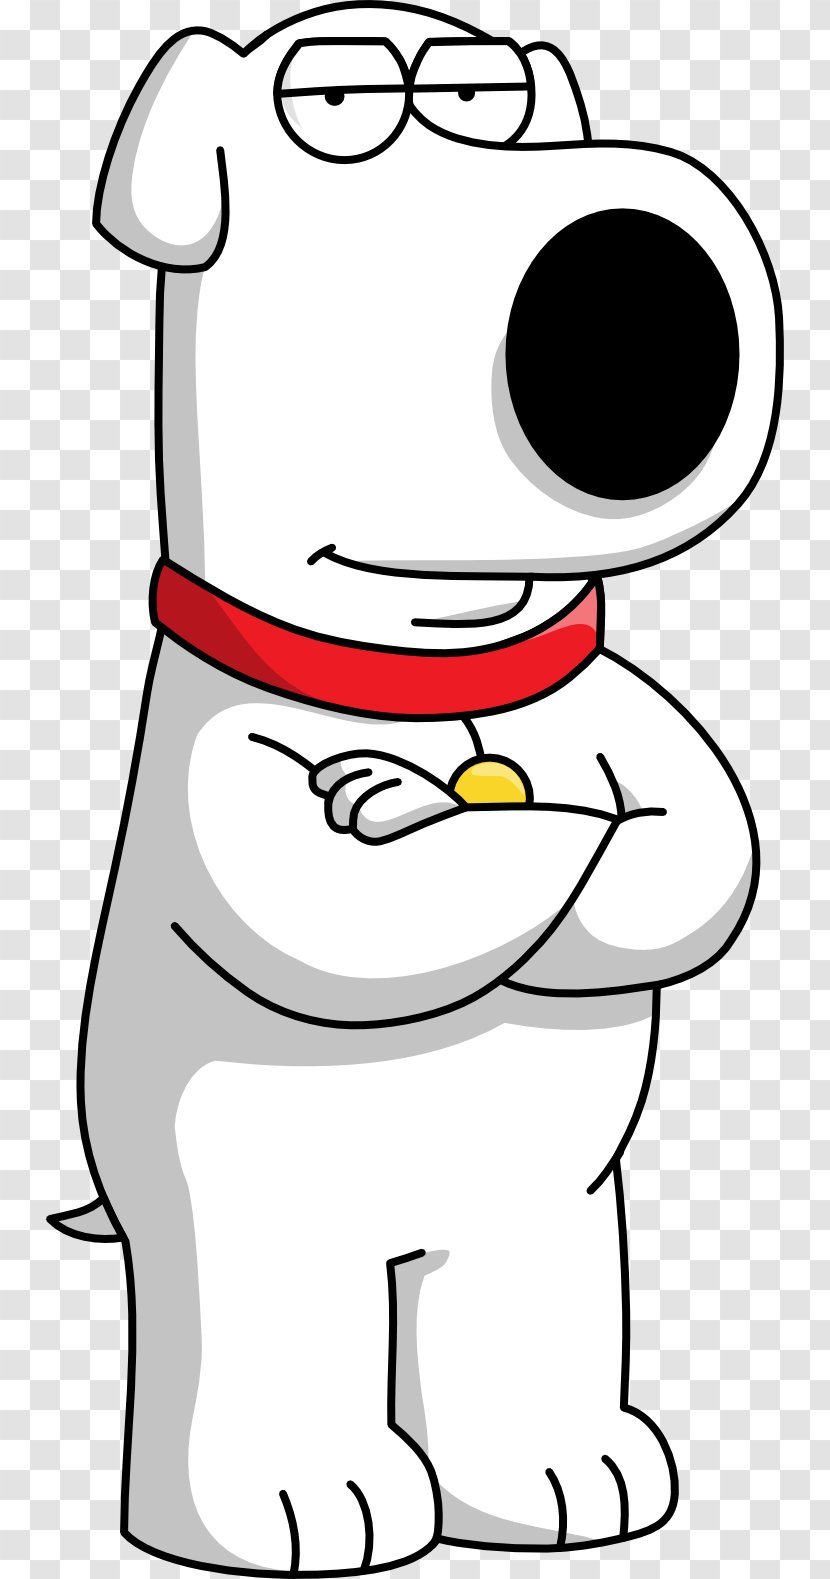 Brian Griffin Family Guy The Quest For Stuff Peter Stewie Meg Heart Silhouette Transparent Png